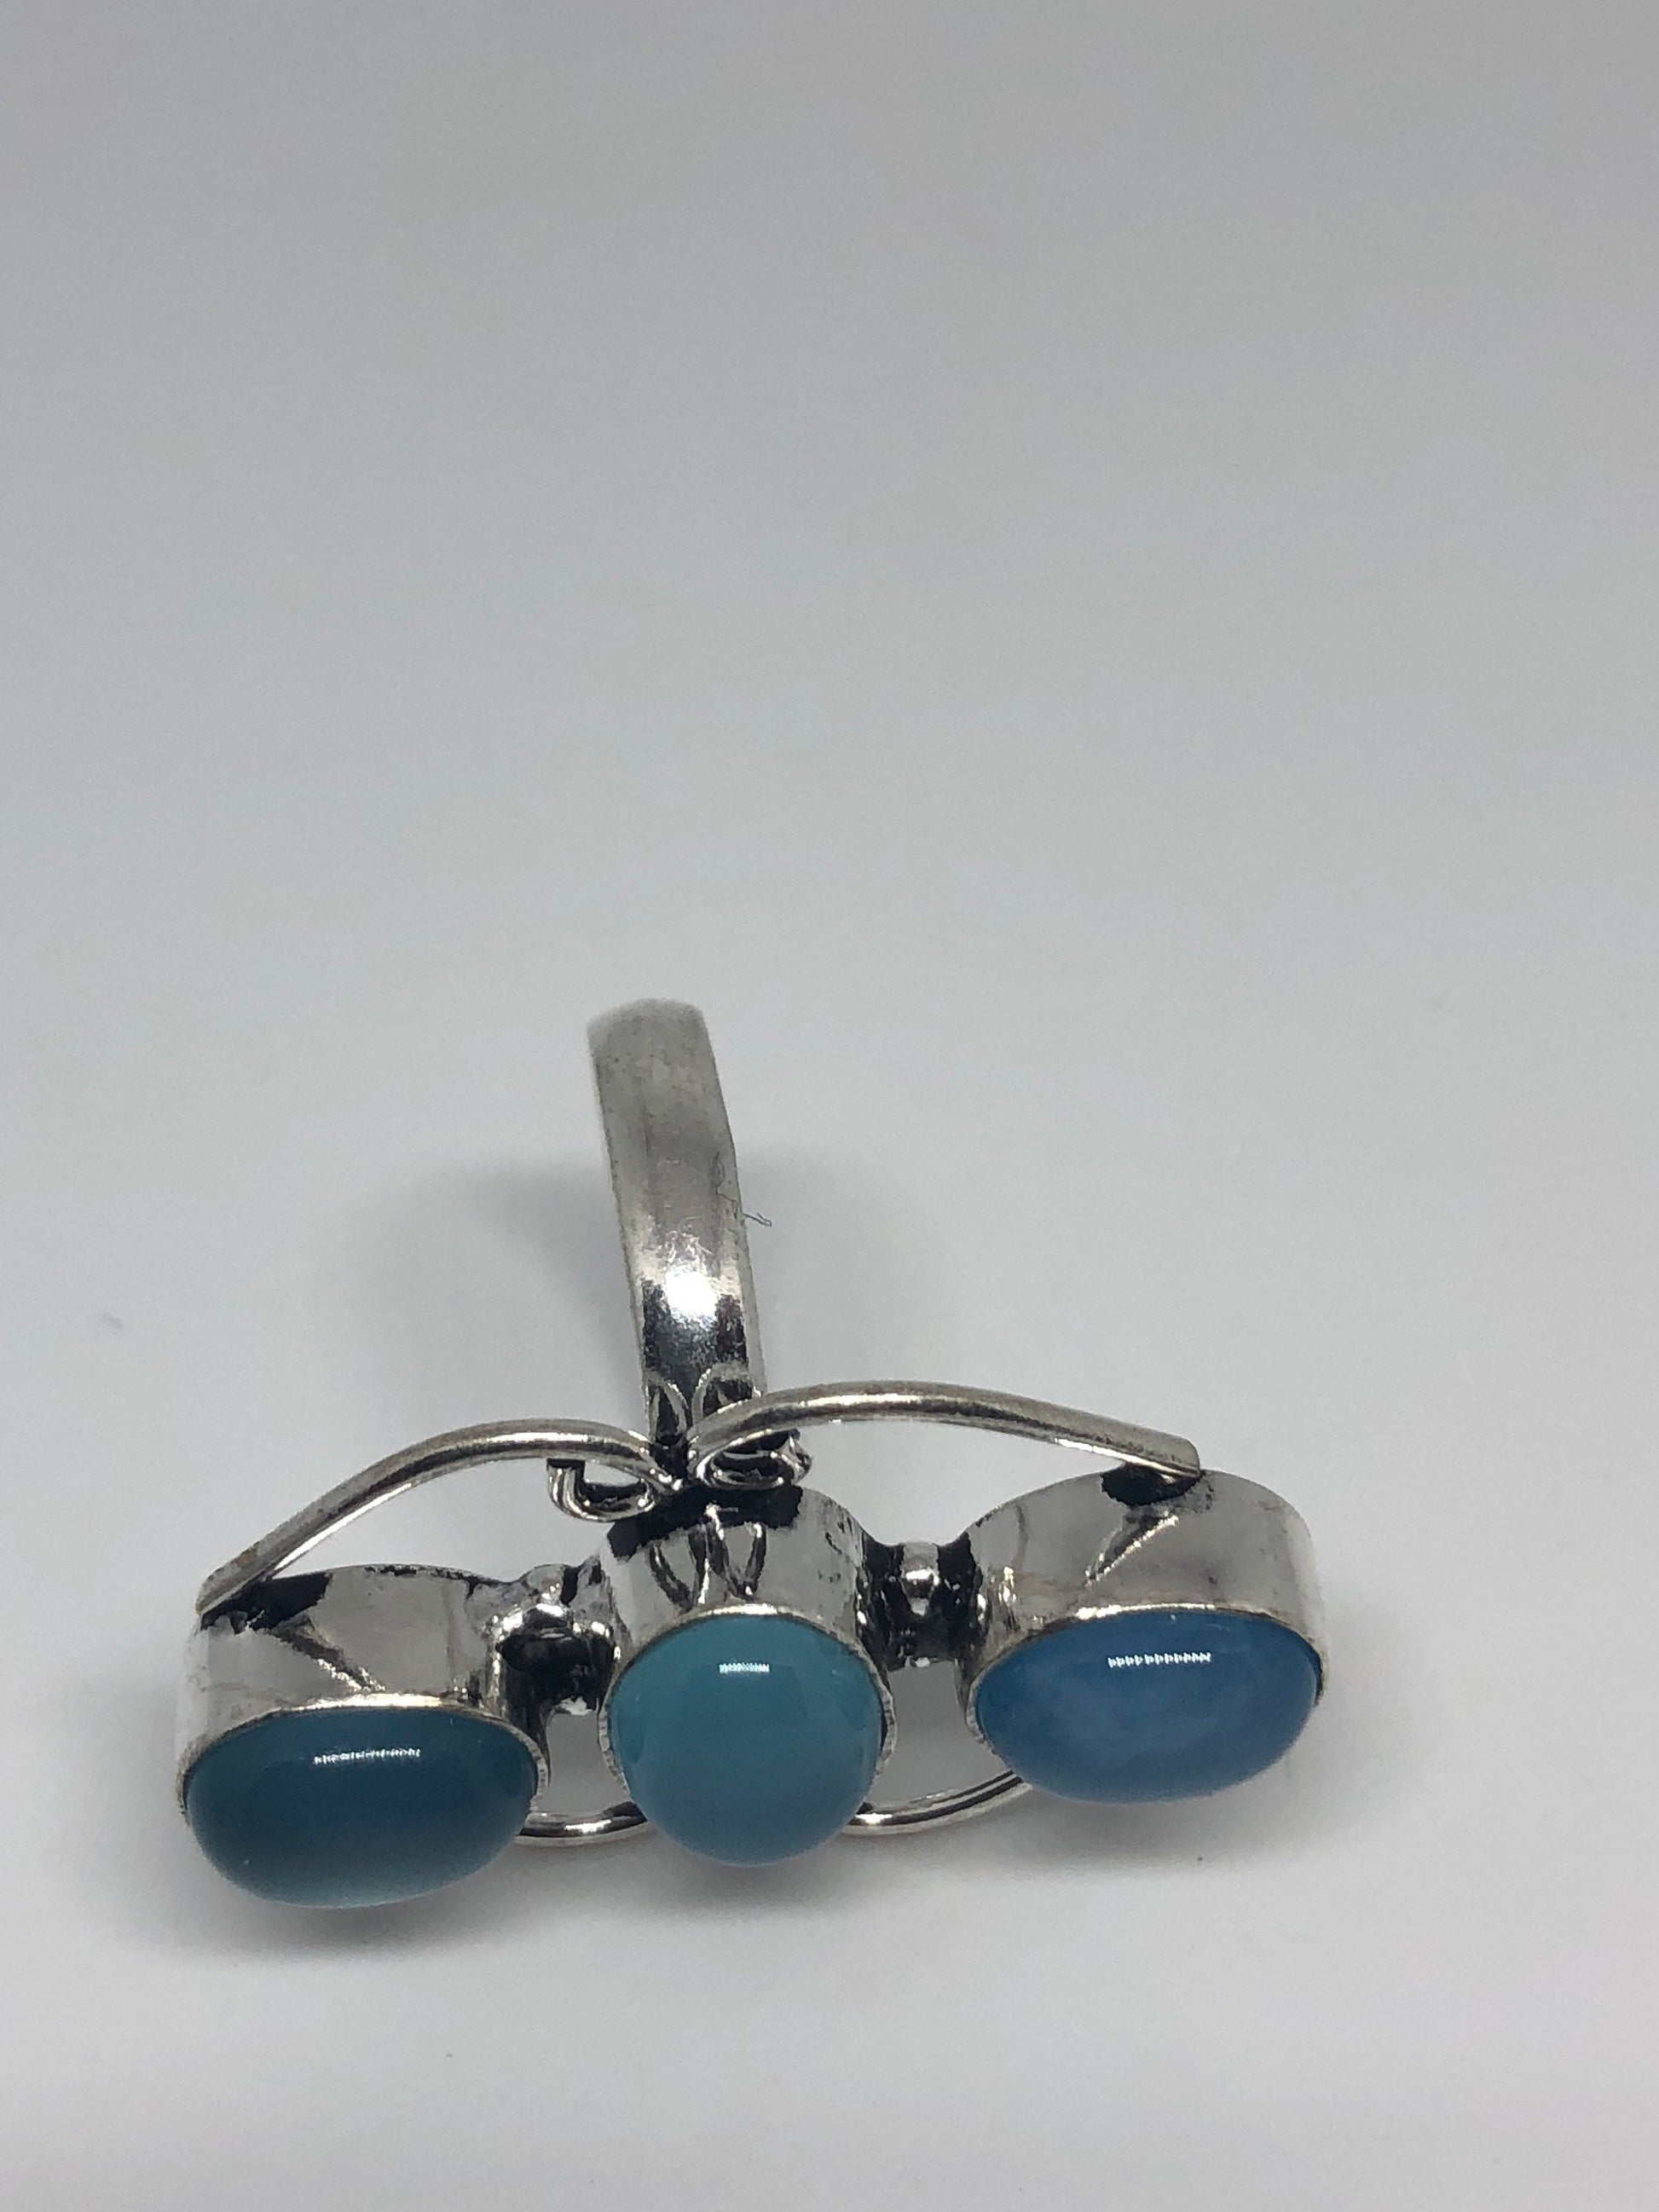 Vintage Genuine Blue Chalcedony an Inch Long Ring